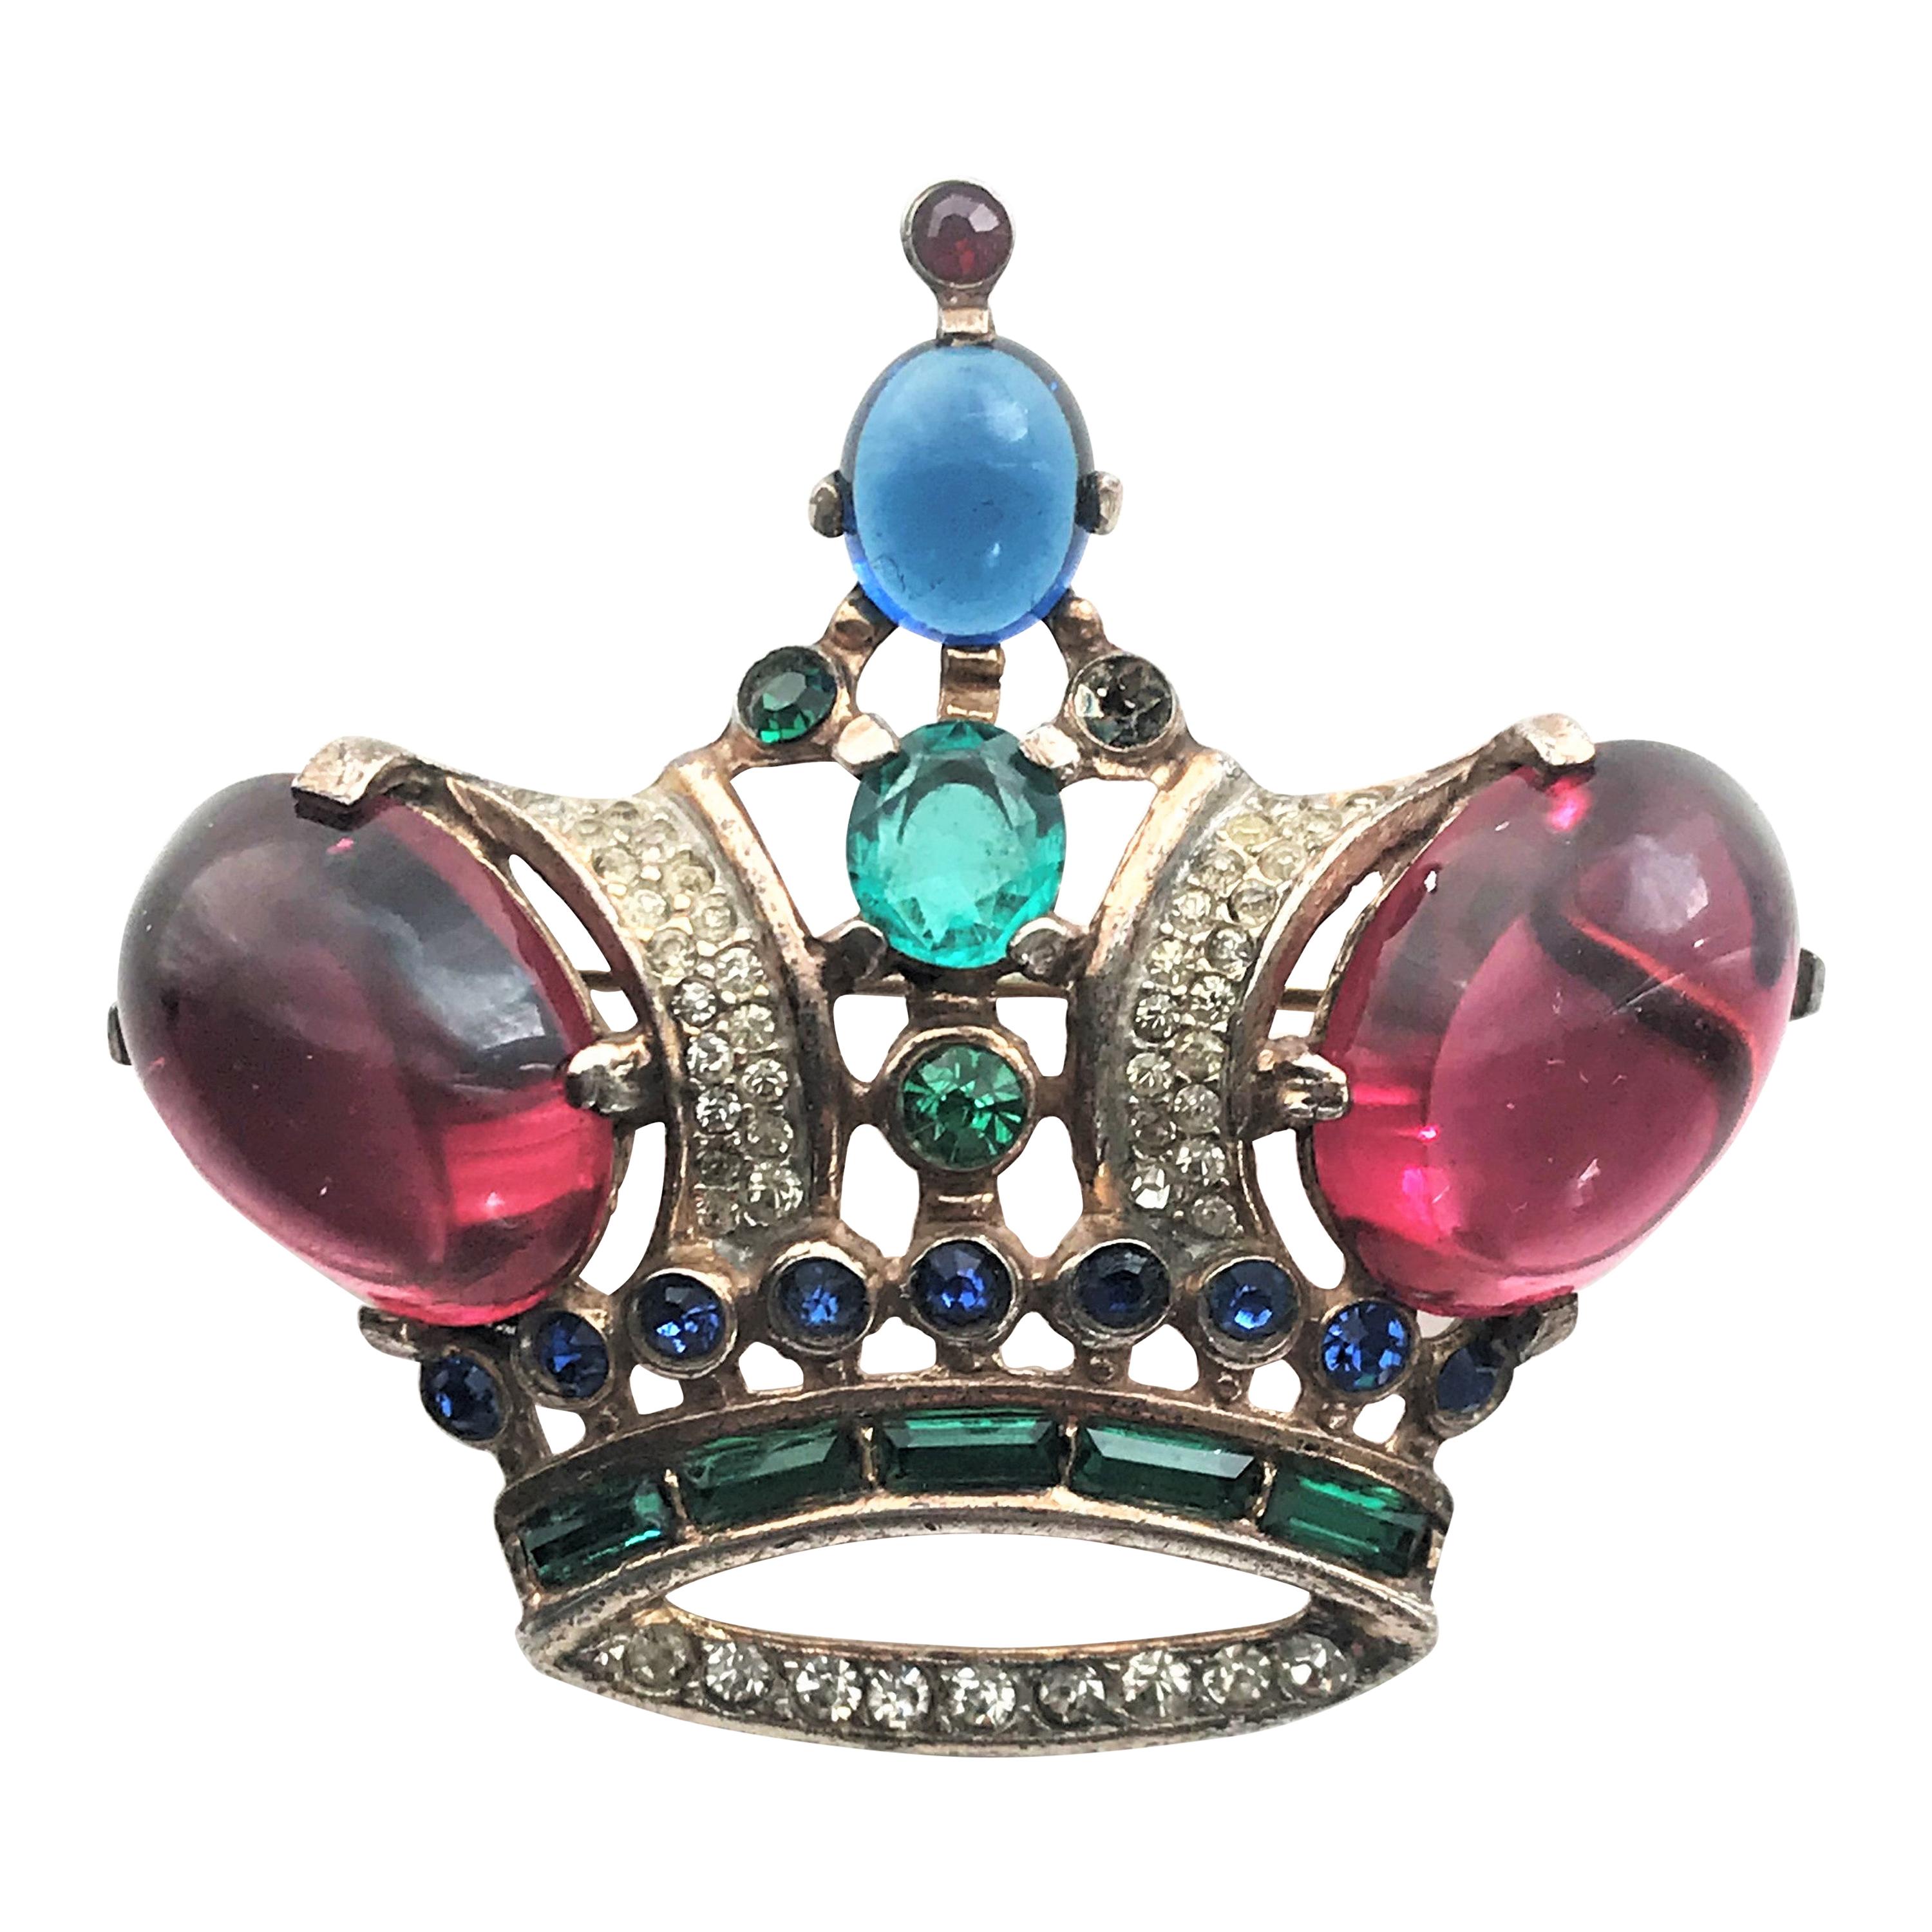  Trifari crown brooch designed by Alfred A Philippe 1940 vermeil sterling silver